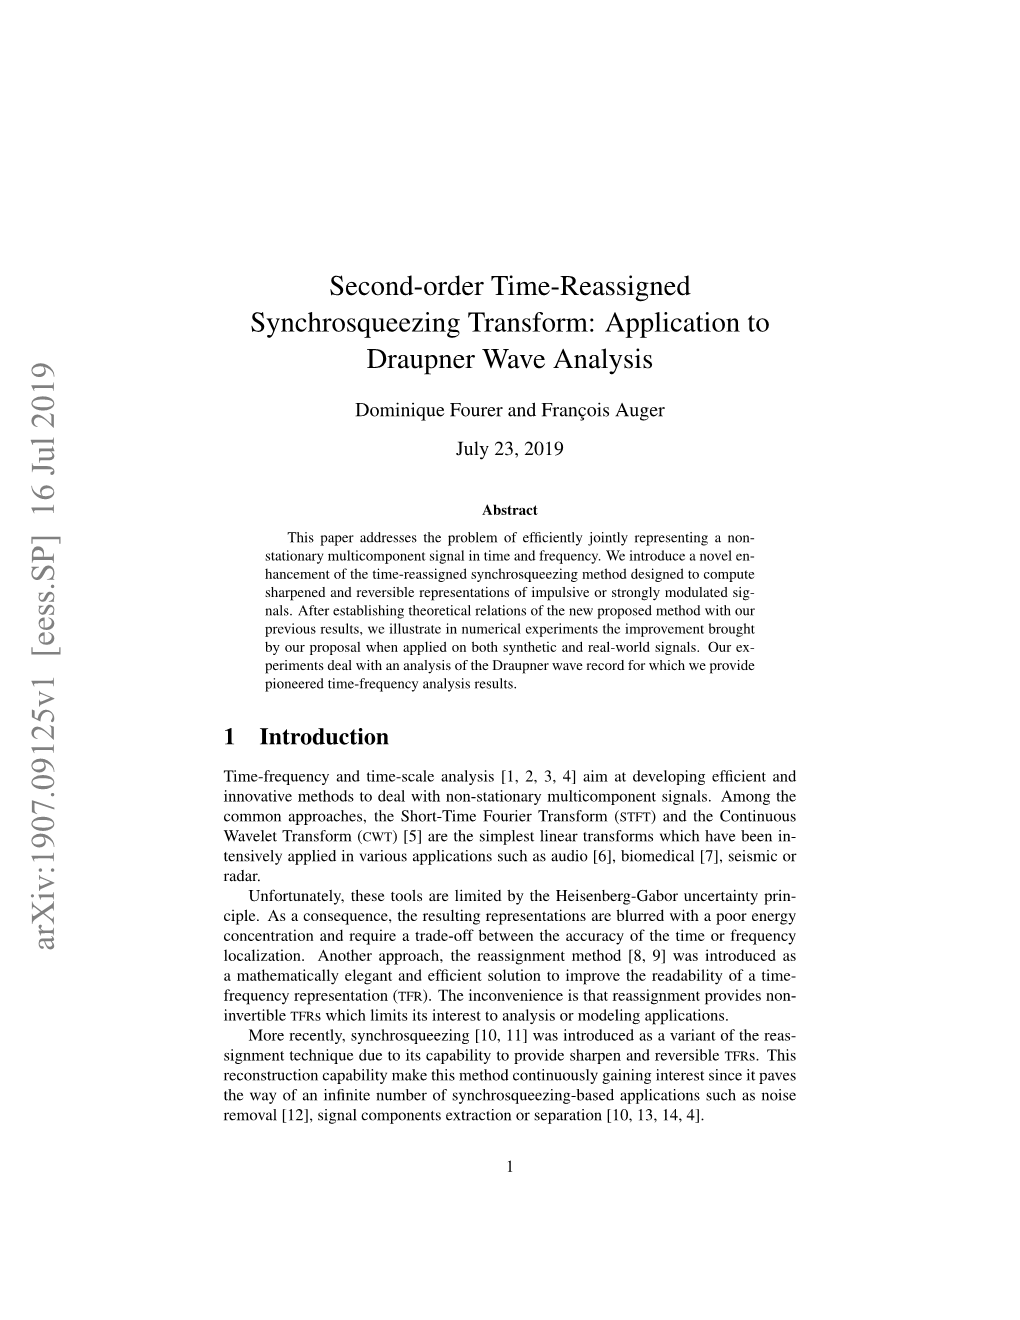 Second-Order Time-Reassigned Synchrosqueezing Transform: Application to Draupner Wave Analysis